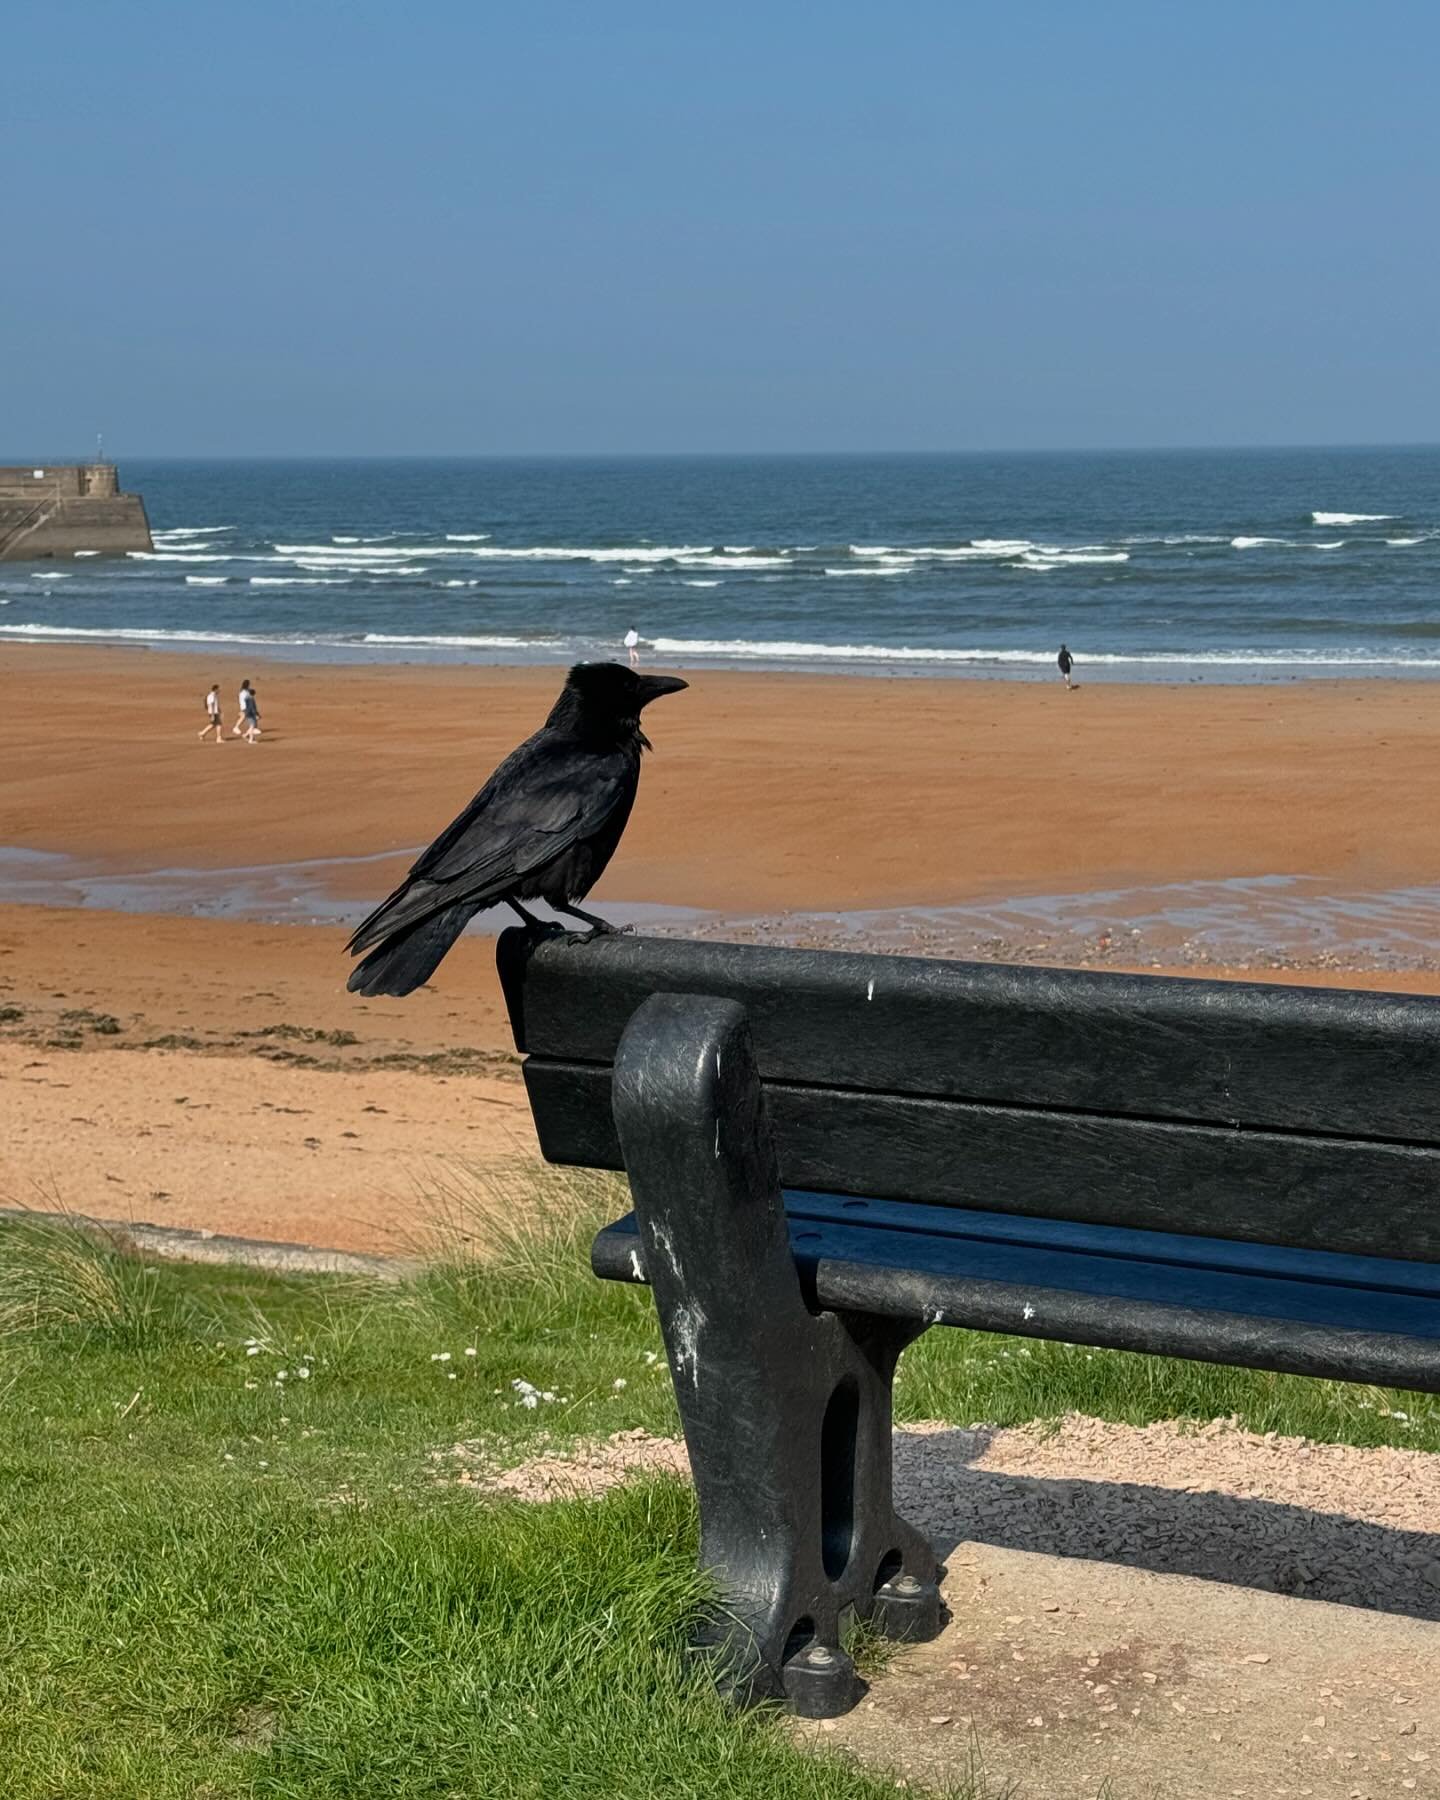 Raven seek thy brother

A word to the Corvid family

This week&rsquo;s day off was tough&hellip;but the sea was cold and the sky was blue&hellip;

&hellip;on St Andrews beach where we hid from chaos for an hour&hellip;

&hellip;and I&rsquo;m now rere